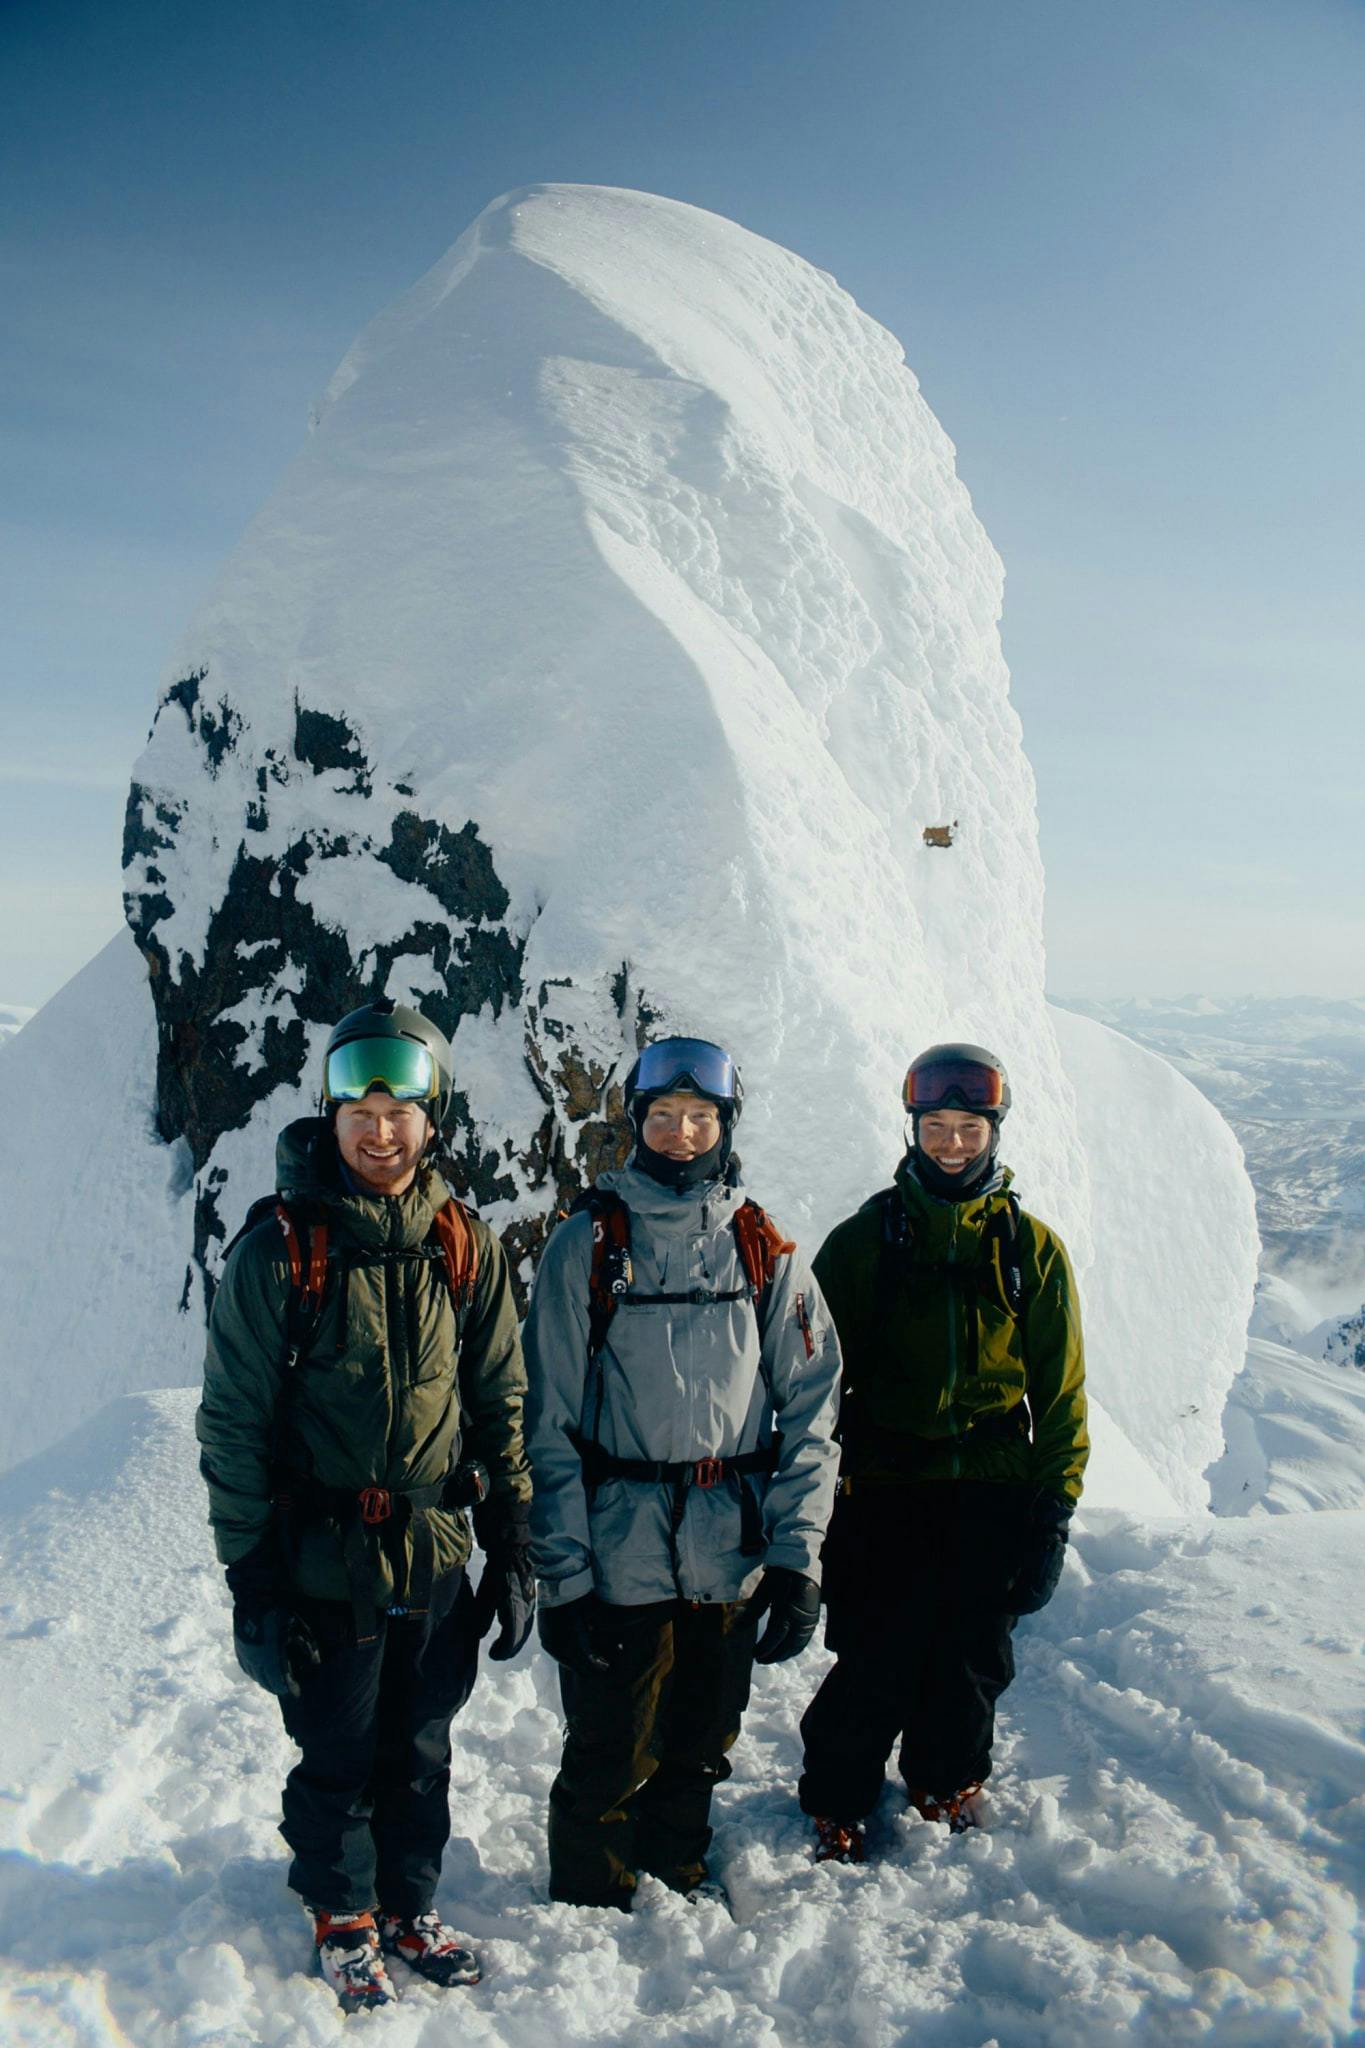 A portrait of three men from the summit of a peak